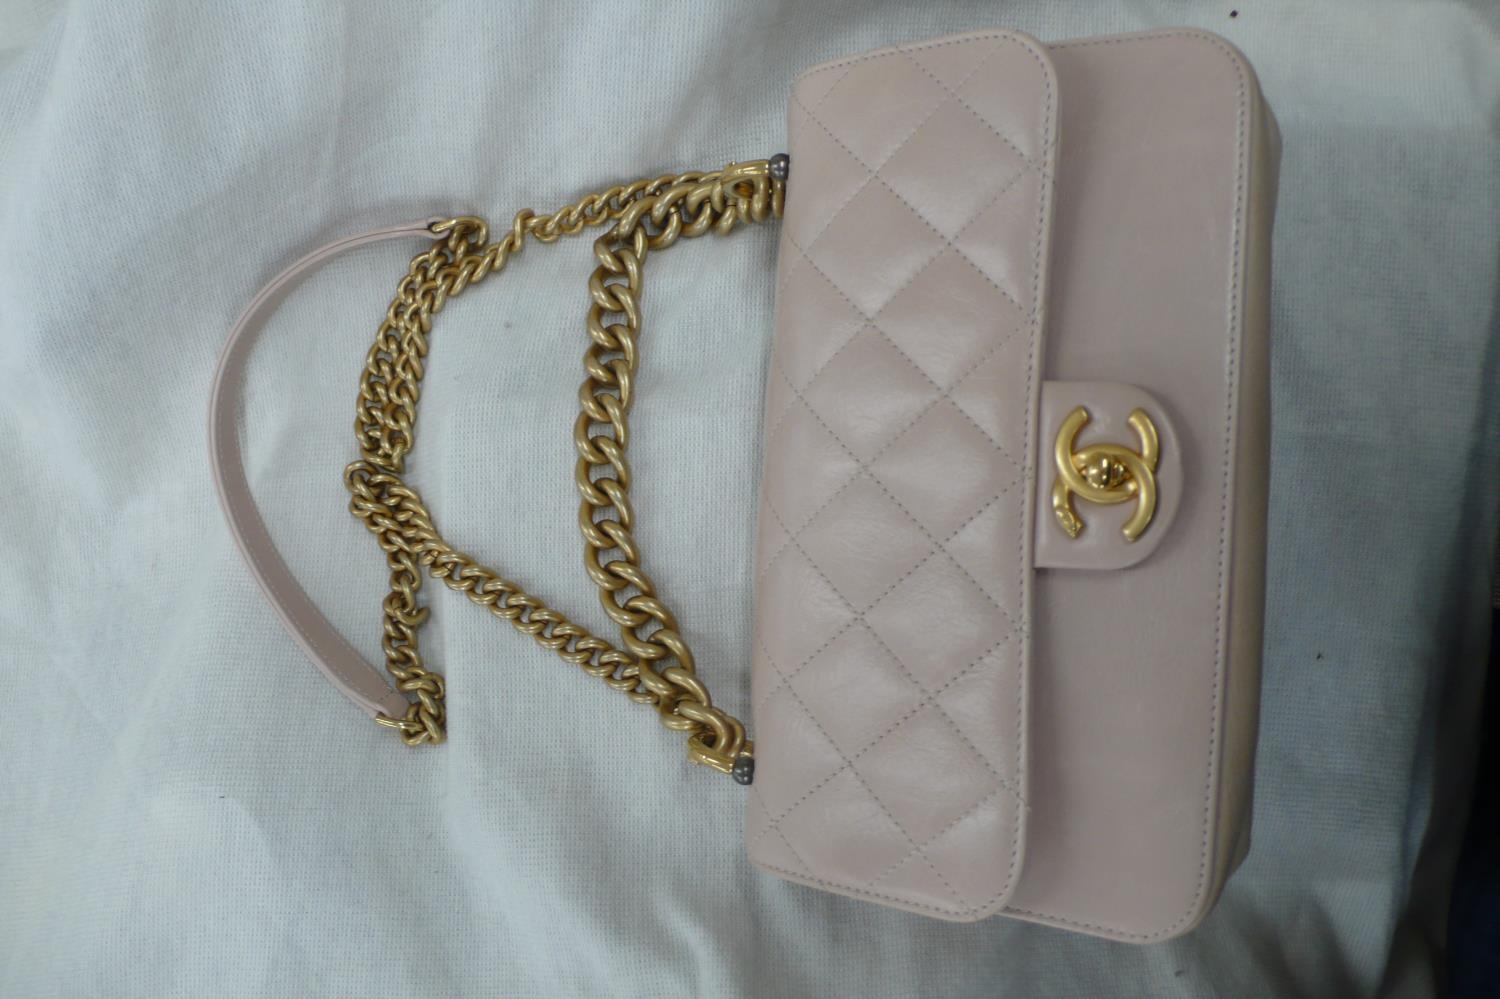 Chanel straight line flap bag, quilted pale pink leather with gold plated long and short handles,